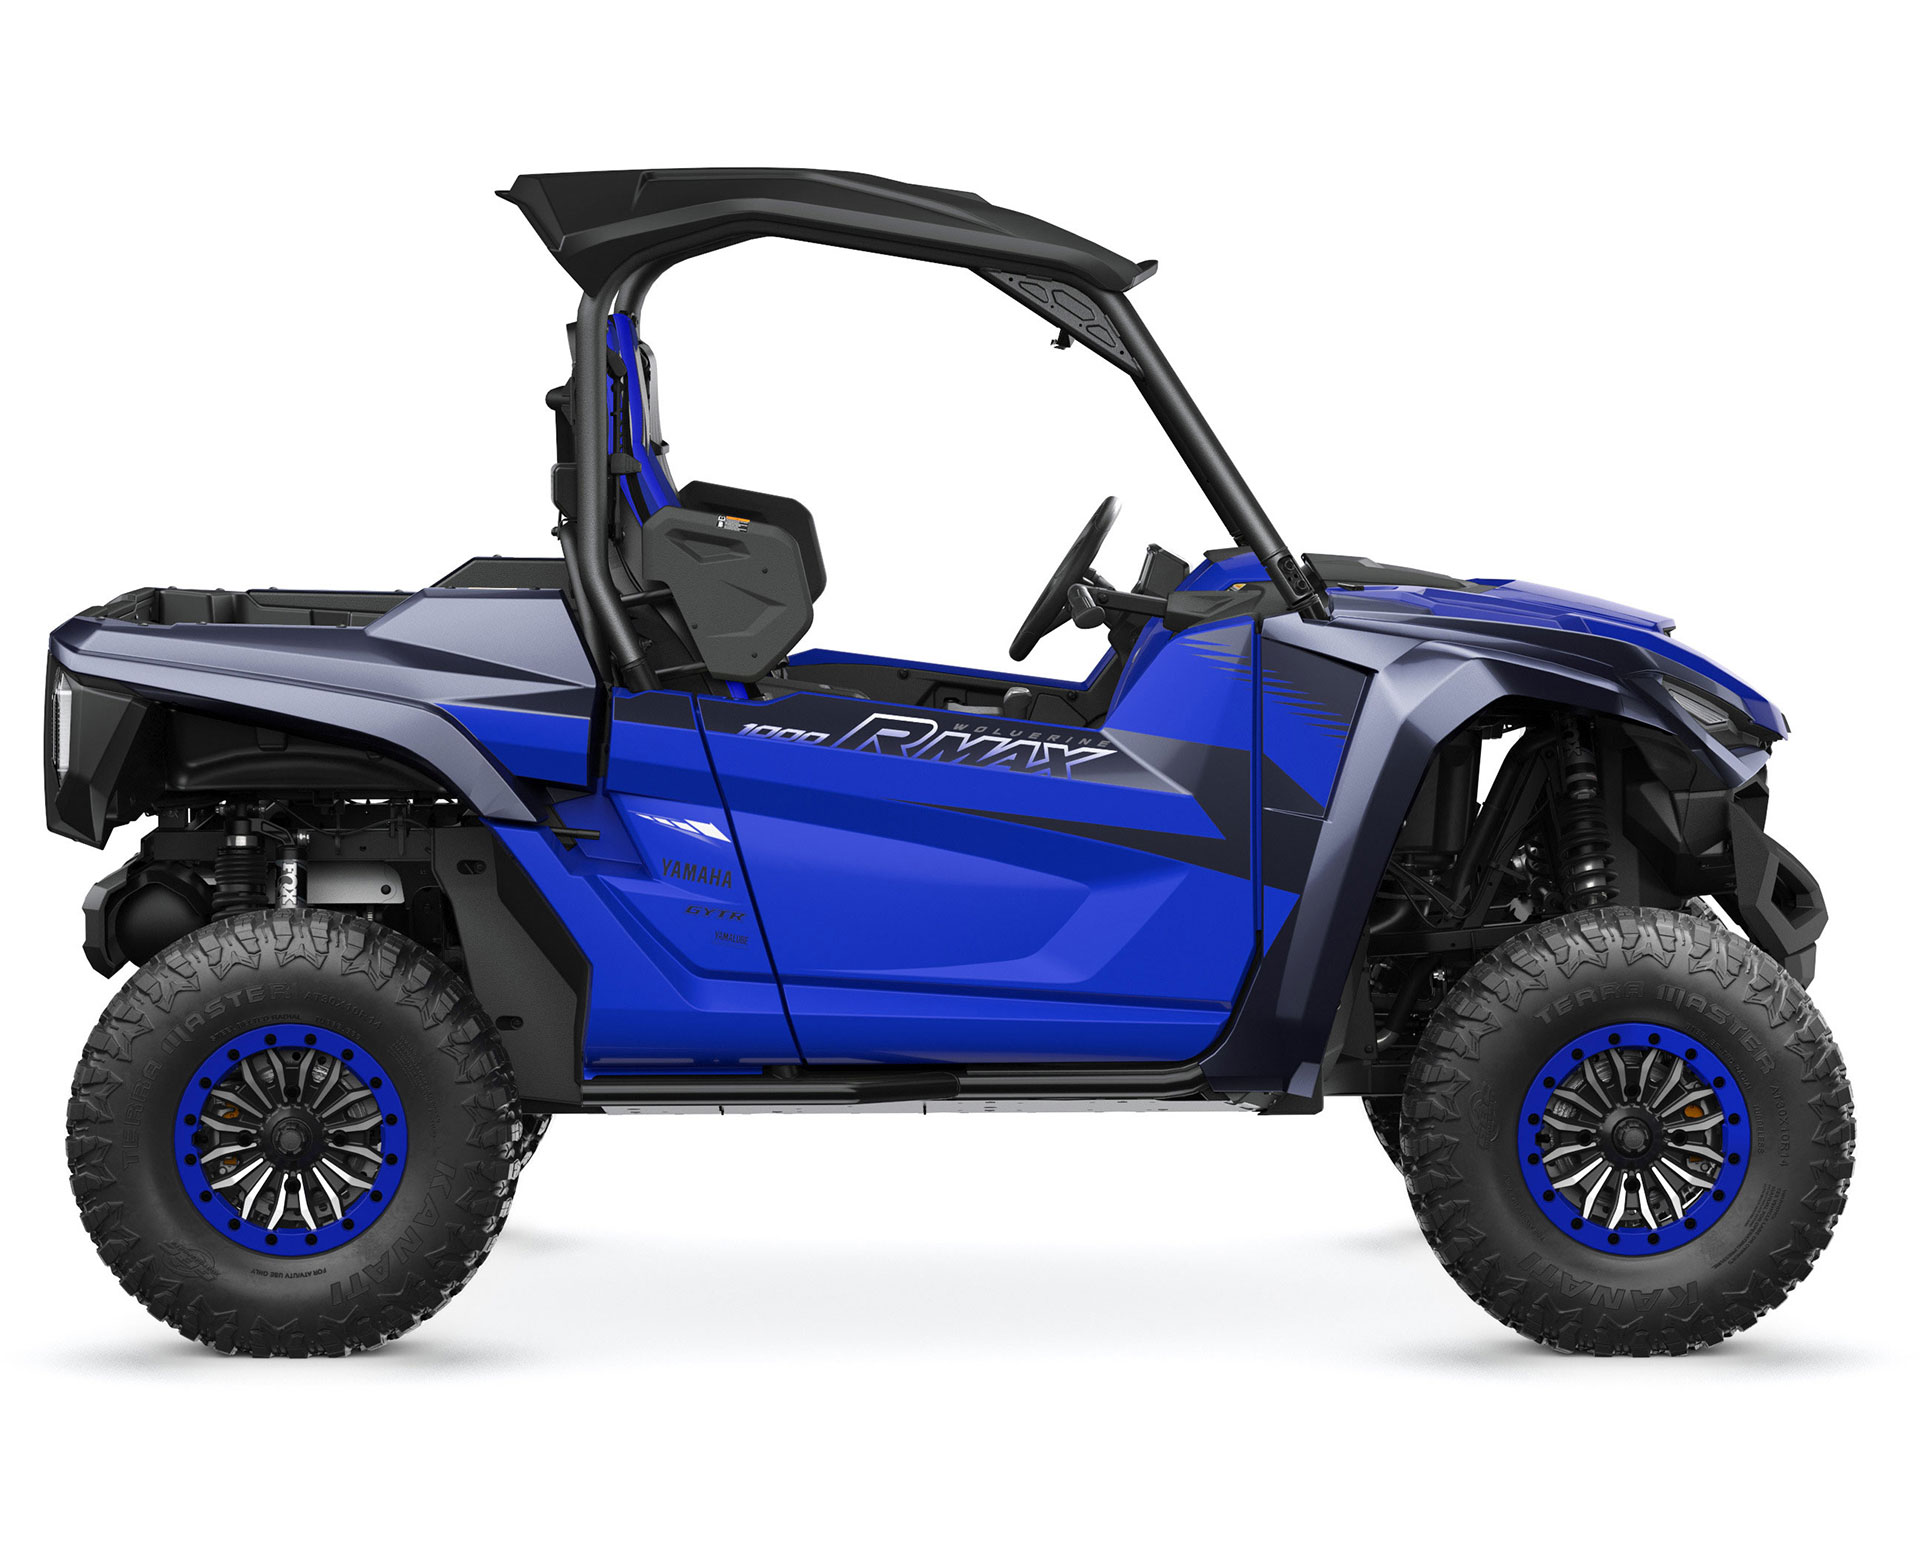 Thumbnail of your customized 2023 WOLVERINE® RMAX2™ 1000 SPORT